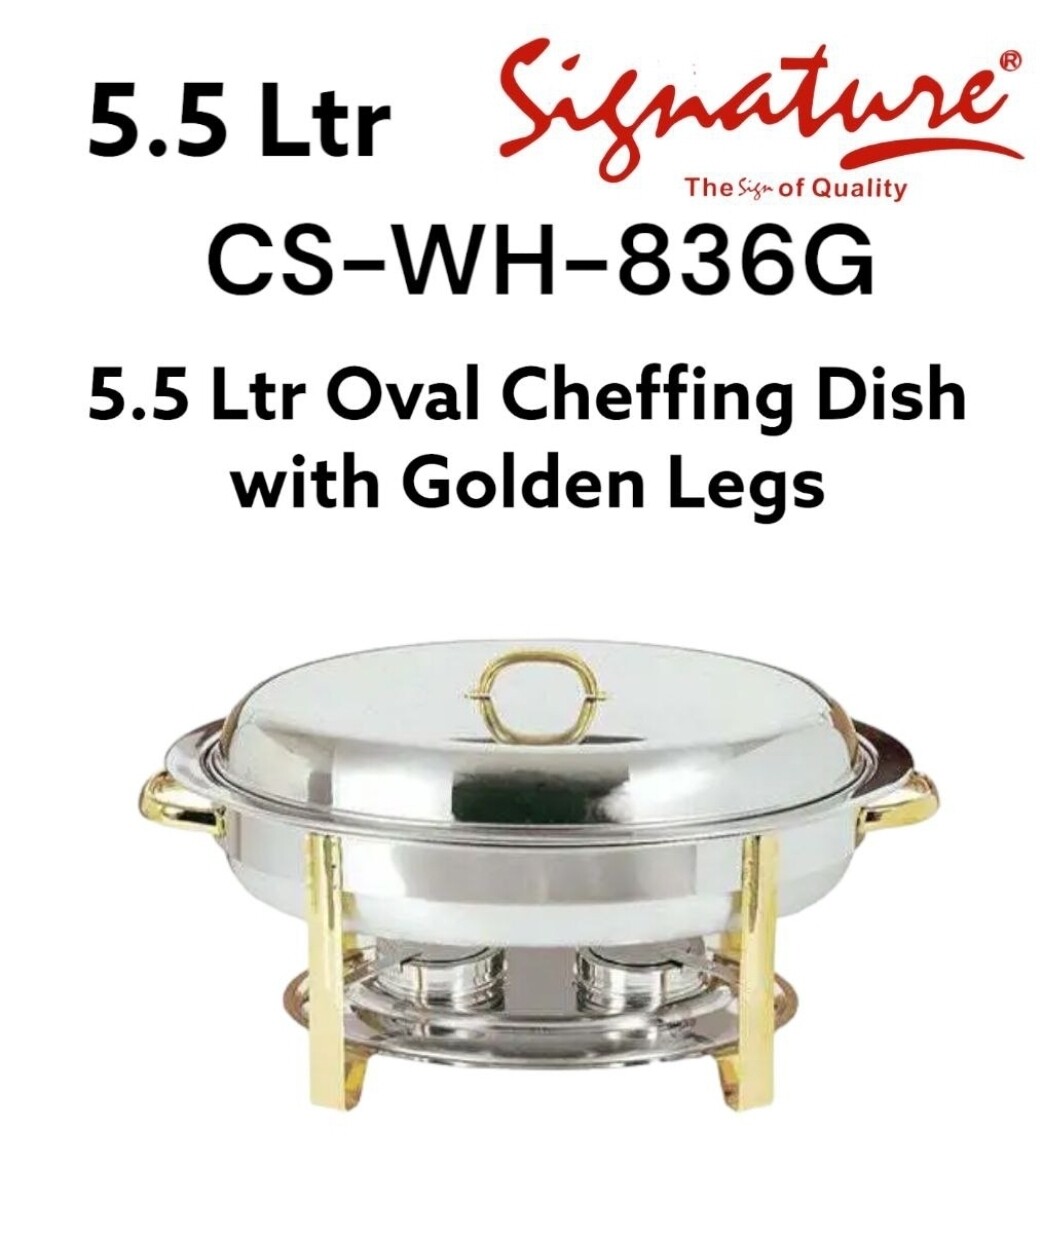 Signature 5.5 Ltr Oval Cheffing Dish with Golden Legs Single Compartment
CS-WH-836G